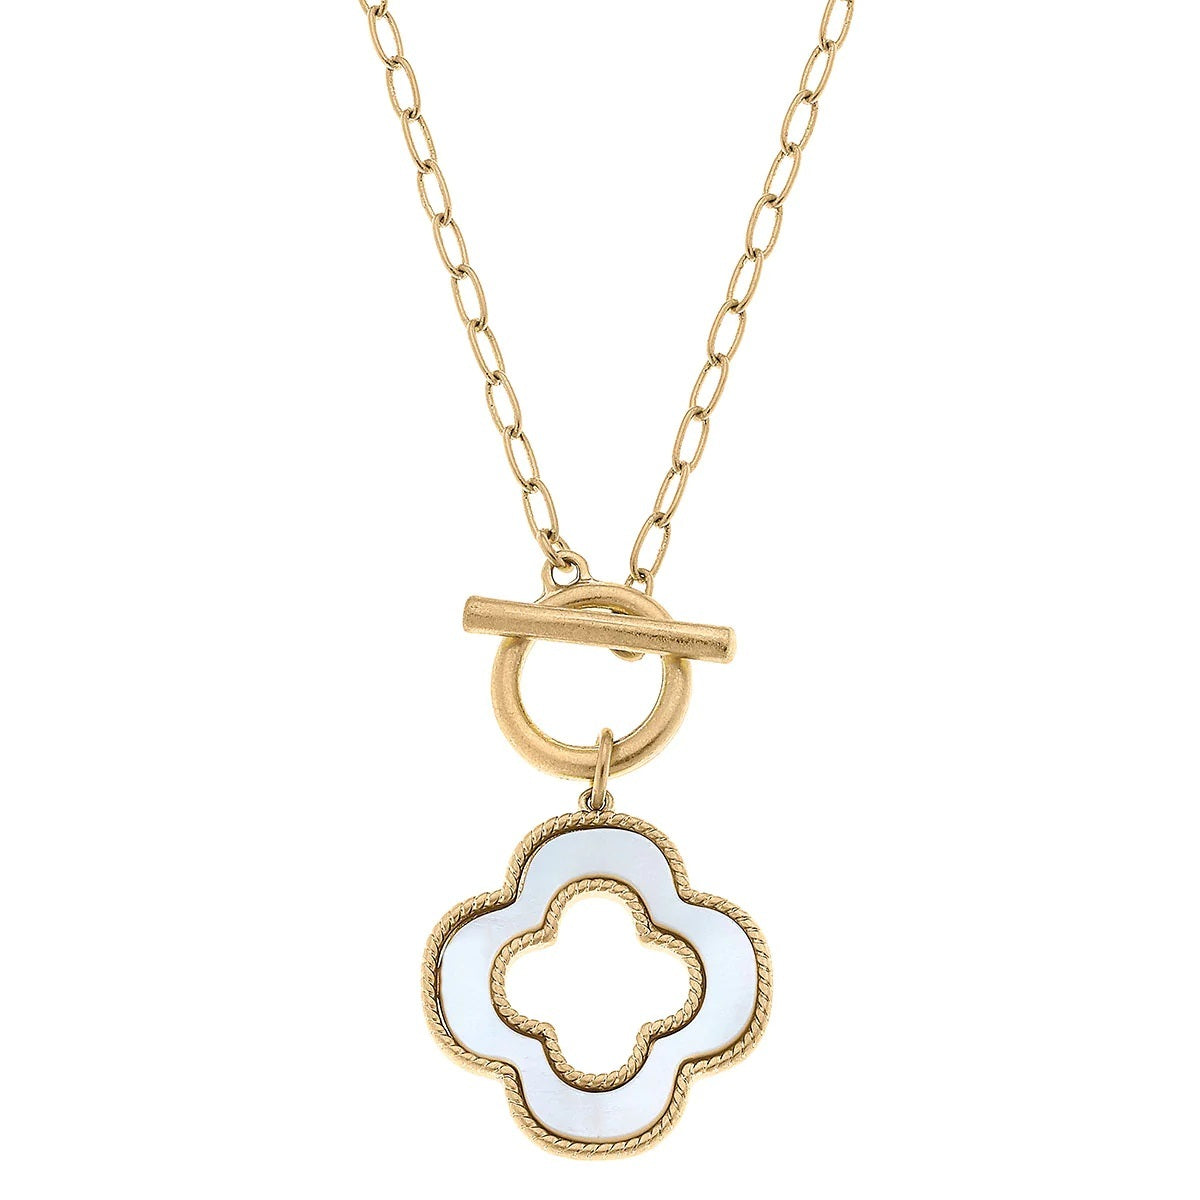 Sadie Clover T-Bar Necklace in Mother of Pearl